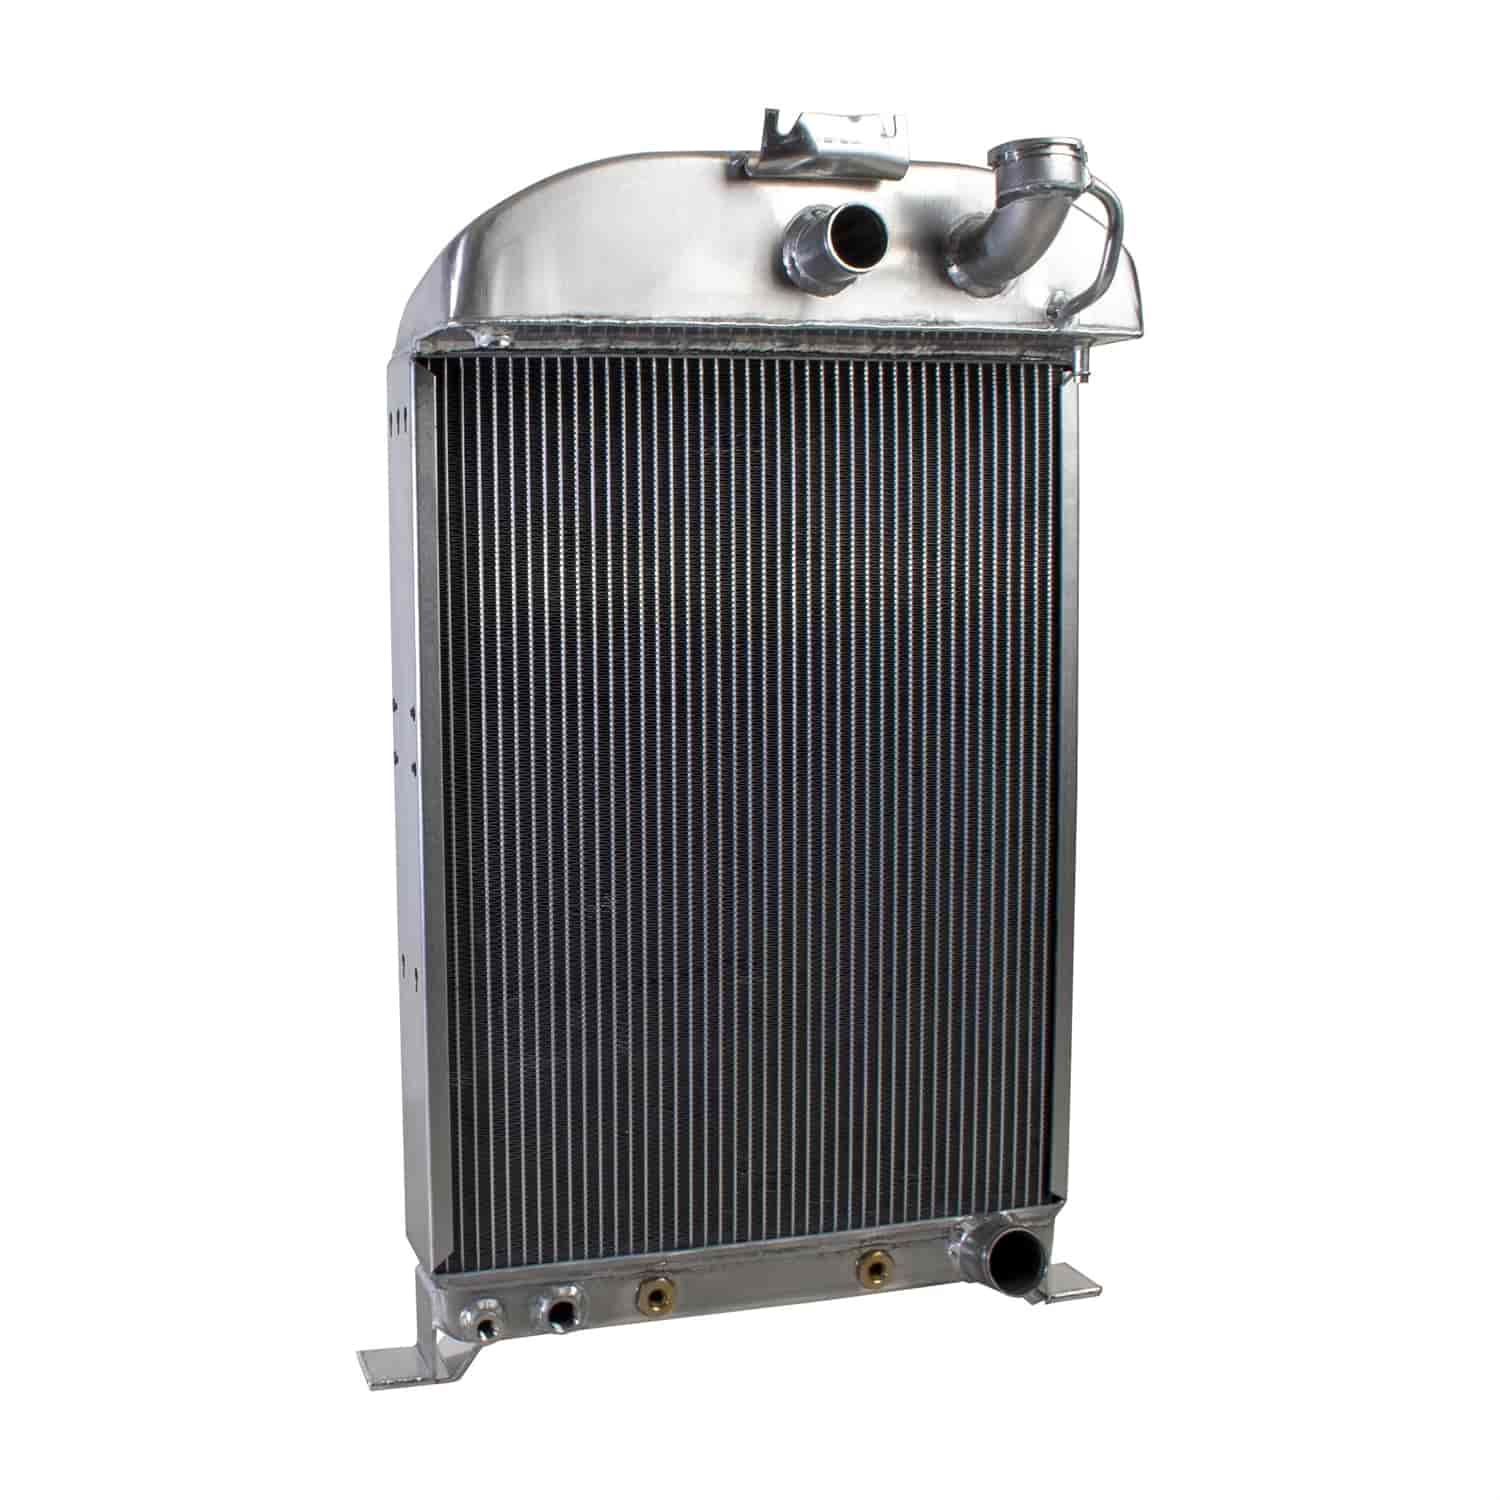 ExactFit Radiator for 1933-1934 Ford with Early GM